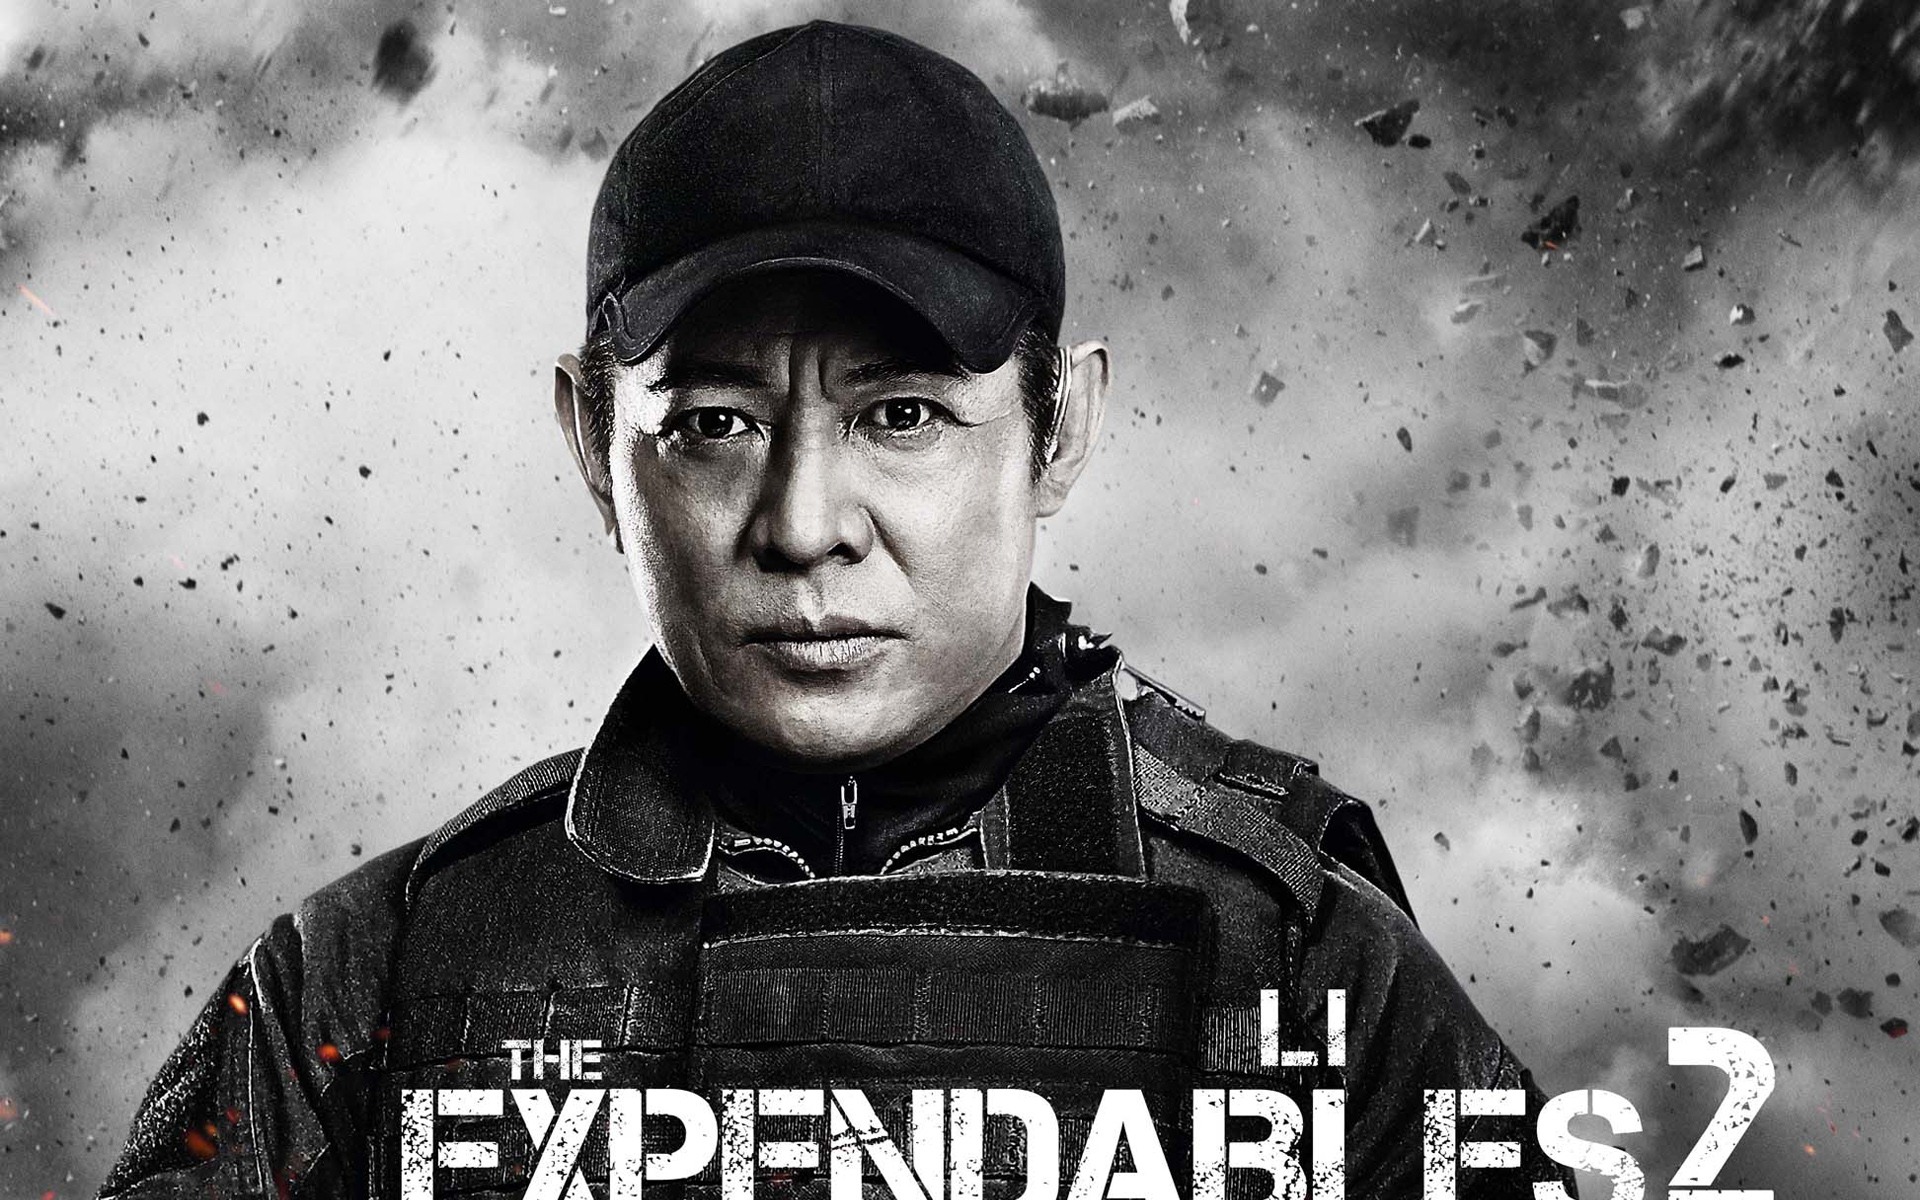 2012 Expendables2 HDの壁紙 #16 - 1920x1200